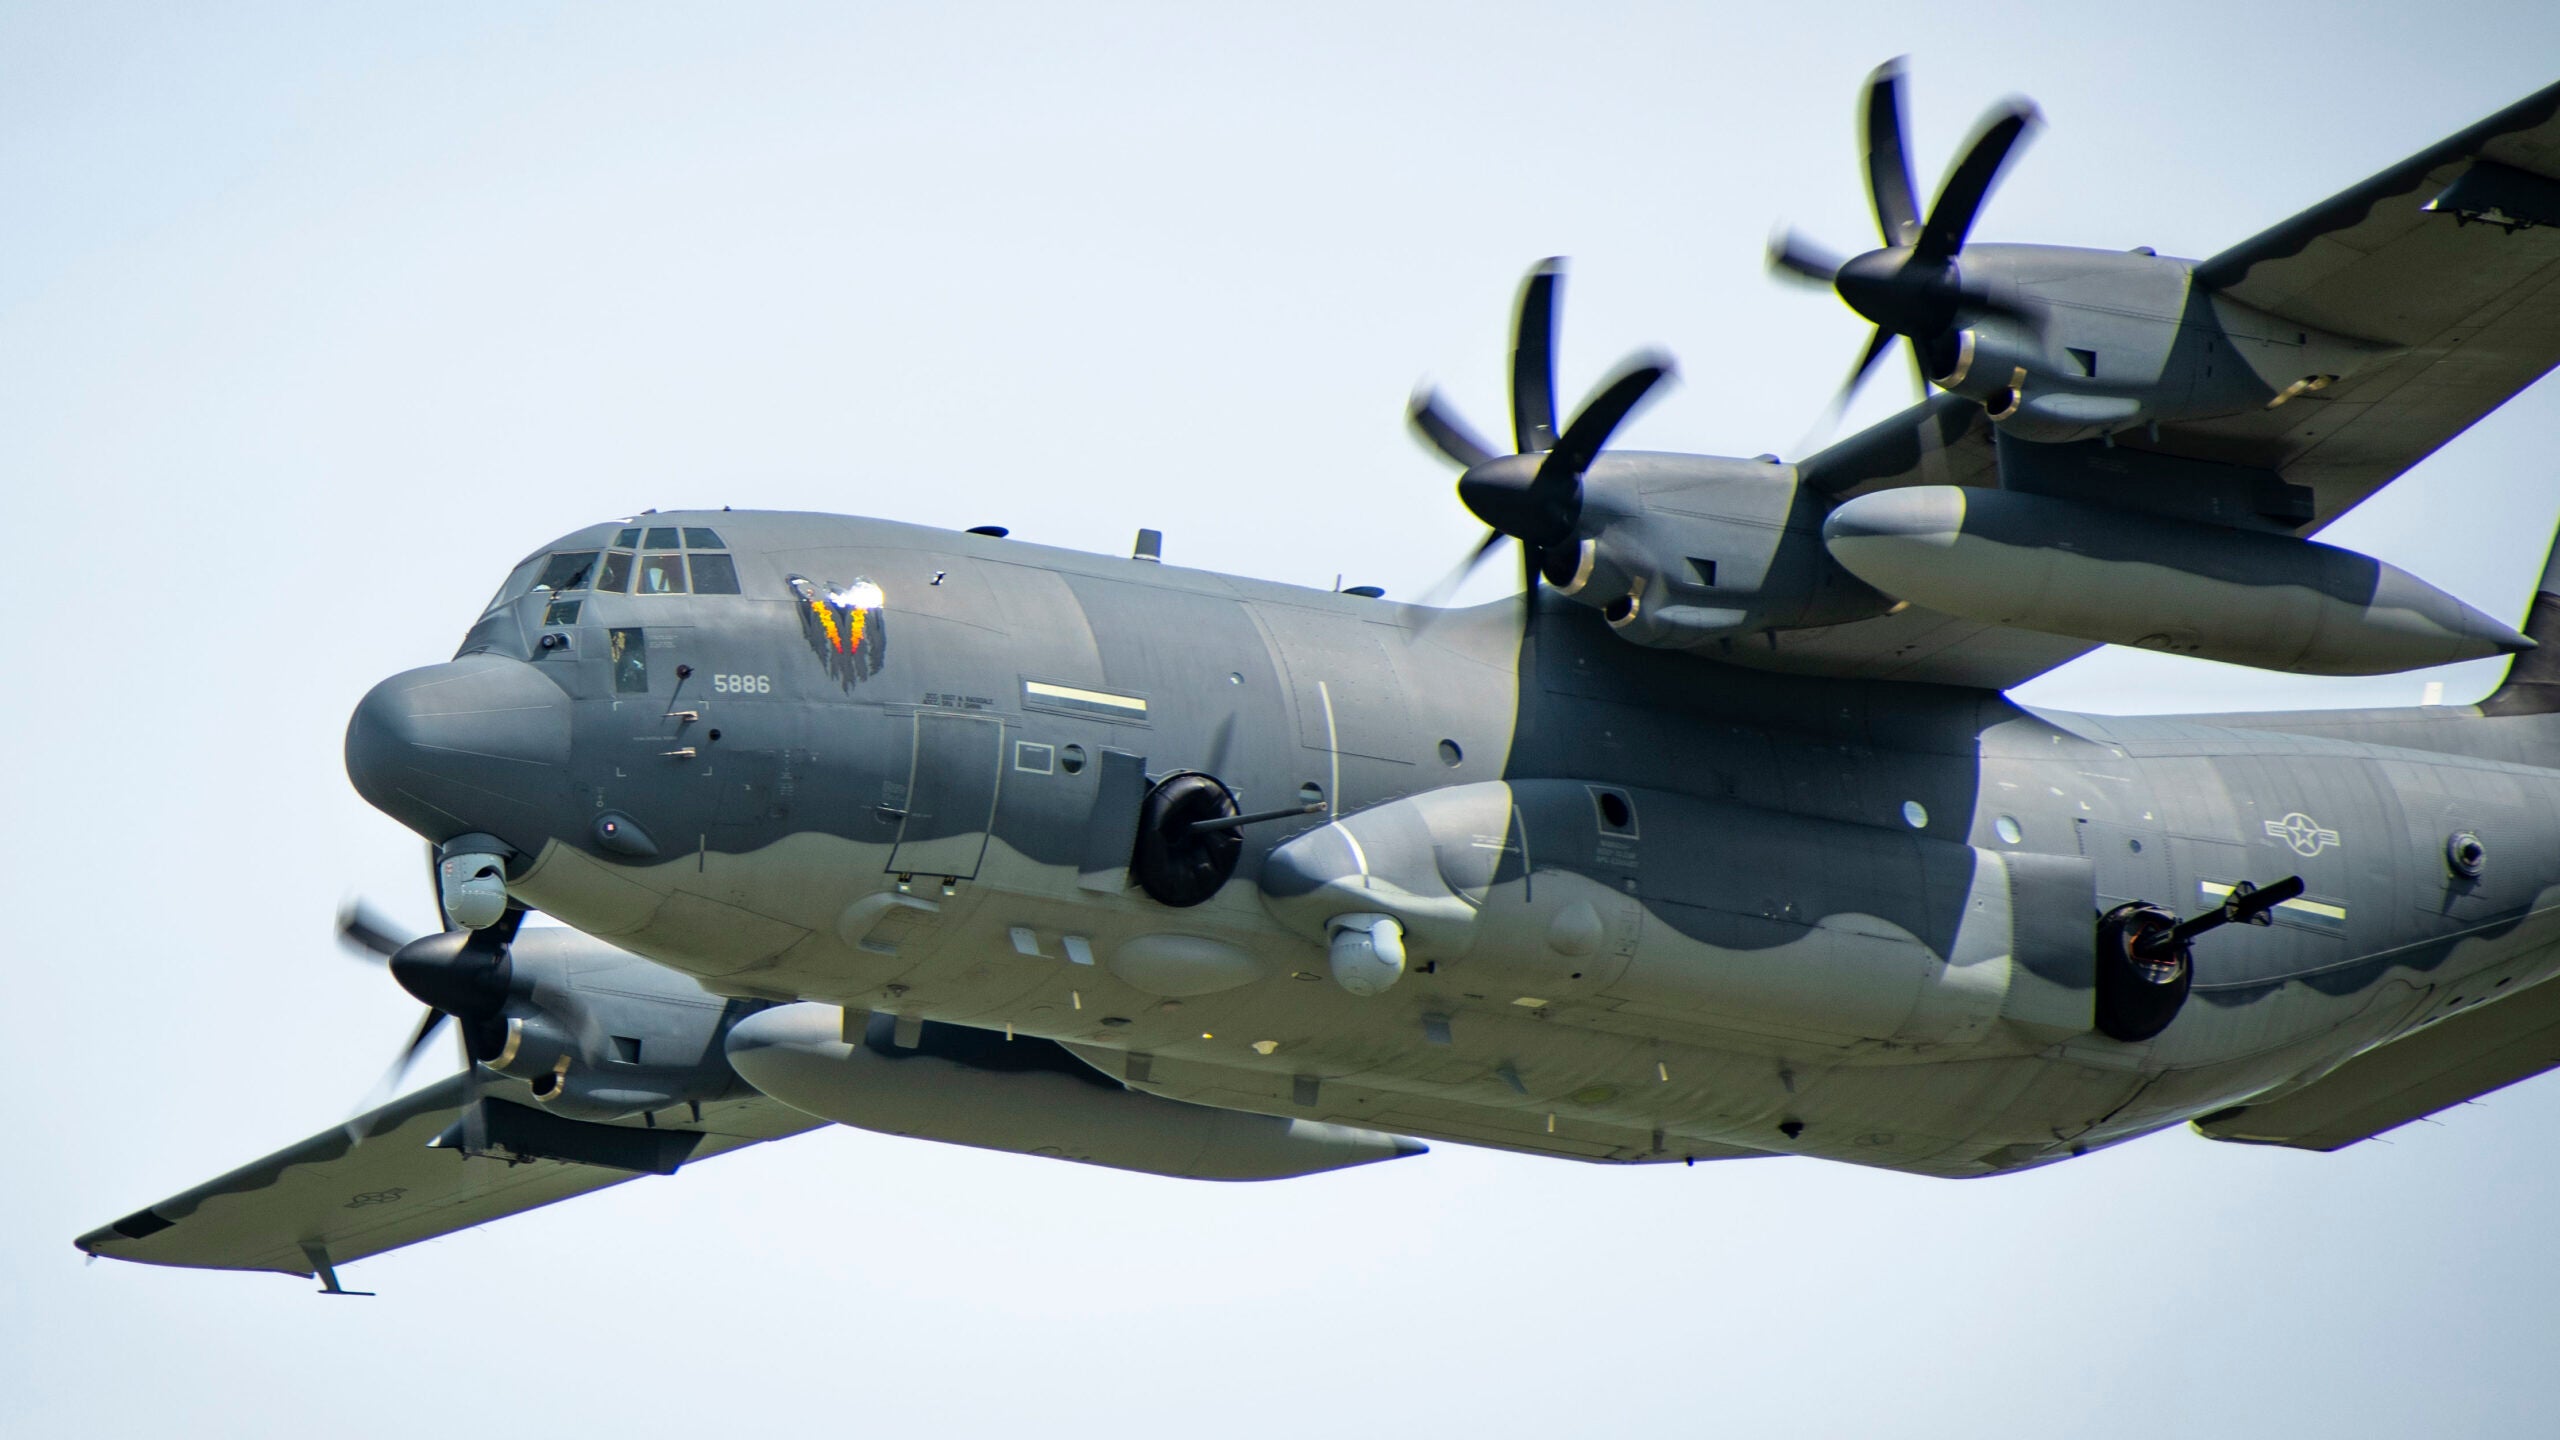 An AC-130J Ghostrider from the 4th Special Operations Squadron at Hurlburt Field, Fla., performs an aerial demonstration during EAA AirVenture Oshkosh 21 at Wittman Regional Airport, Wis., July 30, 2021. With the various Air Force Special Operations Command aircraft and personnel in attendance, AFSOC brings specialized airpower and competitive advantage to the future warfighting environment. (U.S. Air Force photo by Senior Airman Miranda Mahoney)